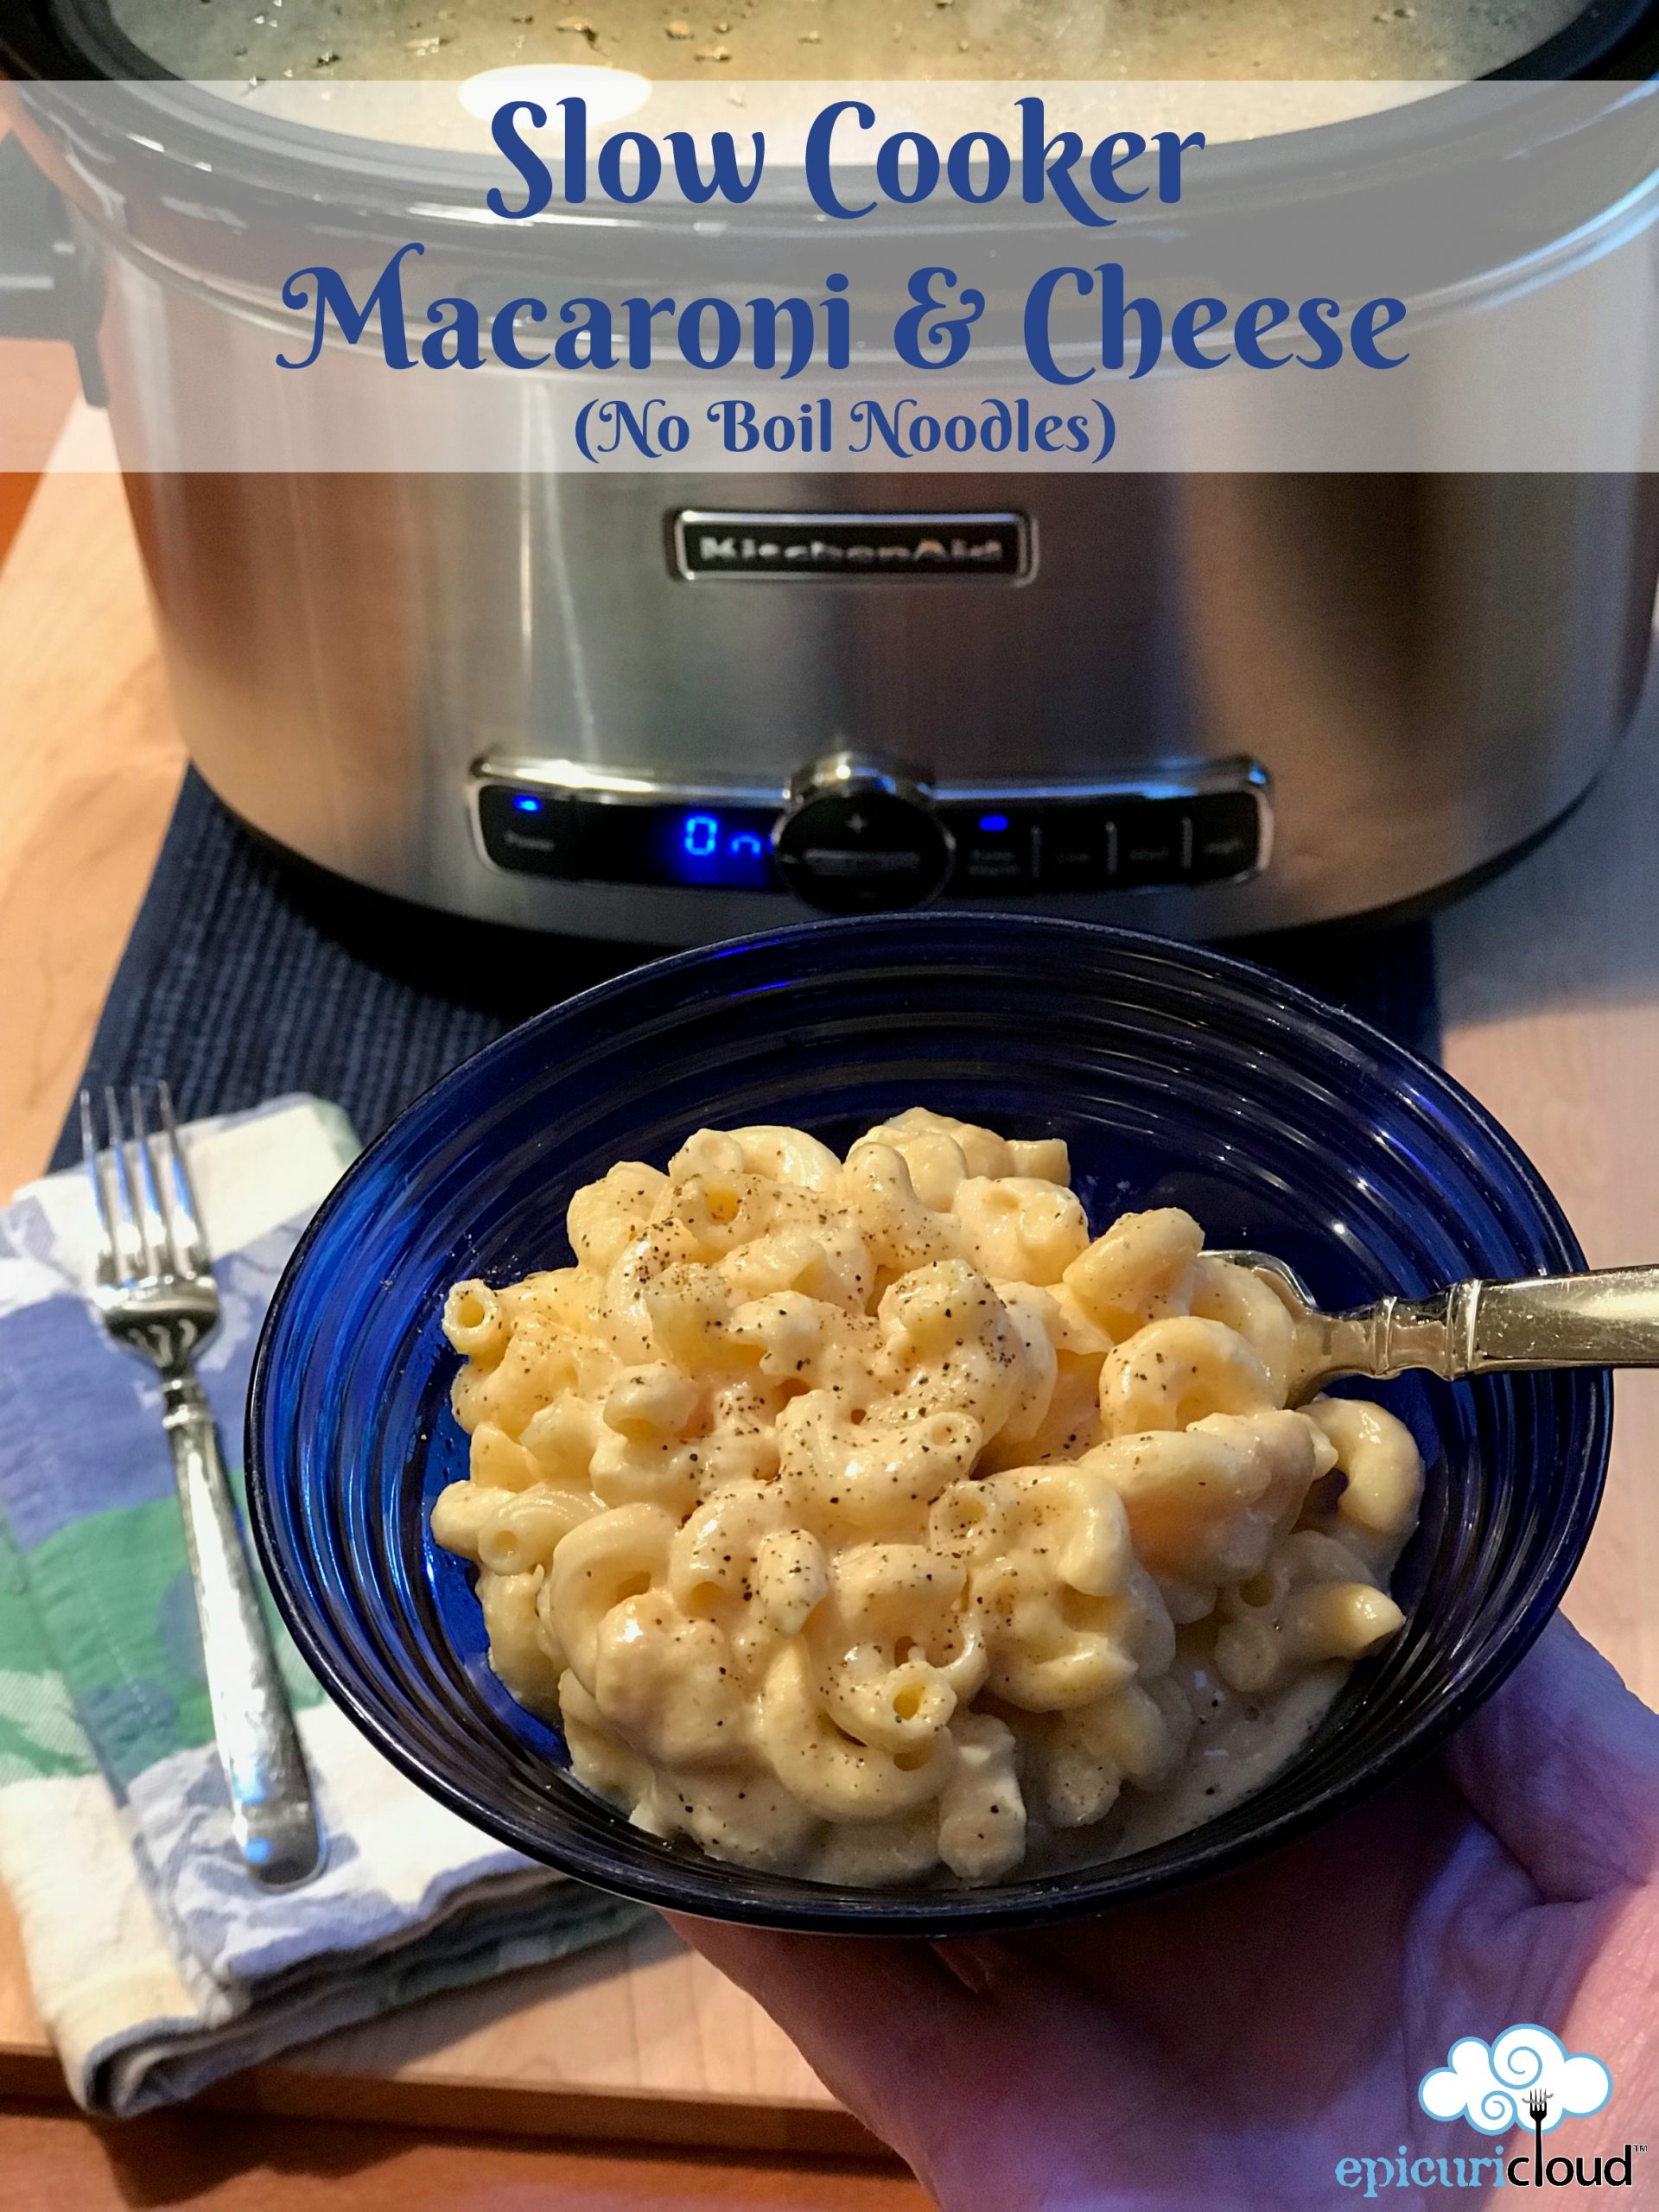 https://www.epicuricloud.com/wp-content/uploads/2018/03/SlowCookerMacaroniandCheese-1-scaled.jpg